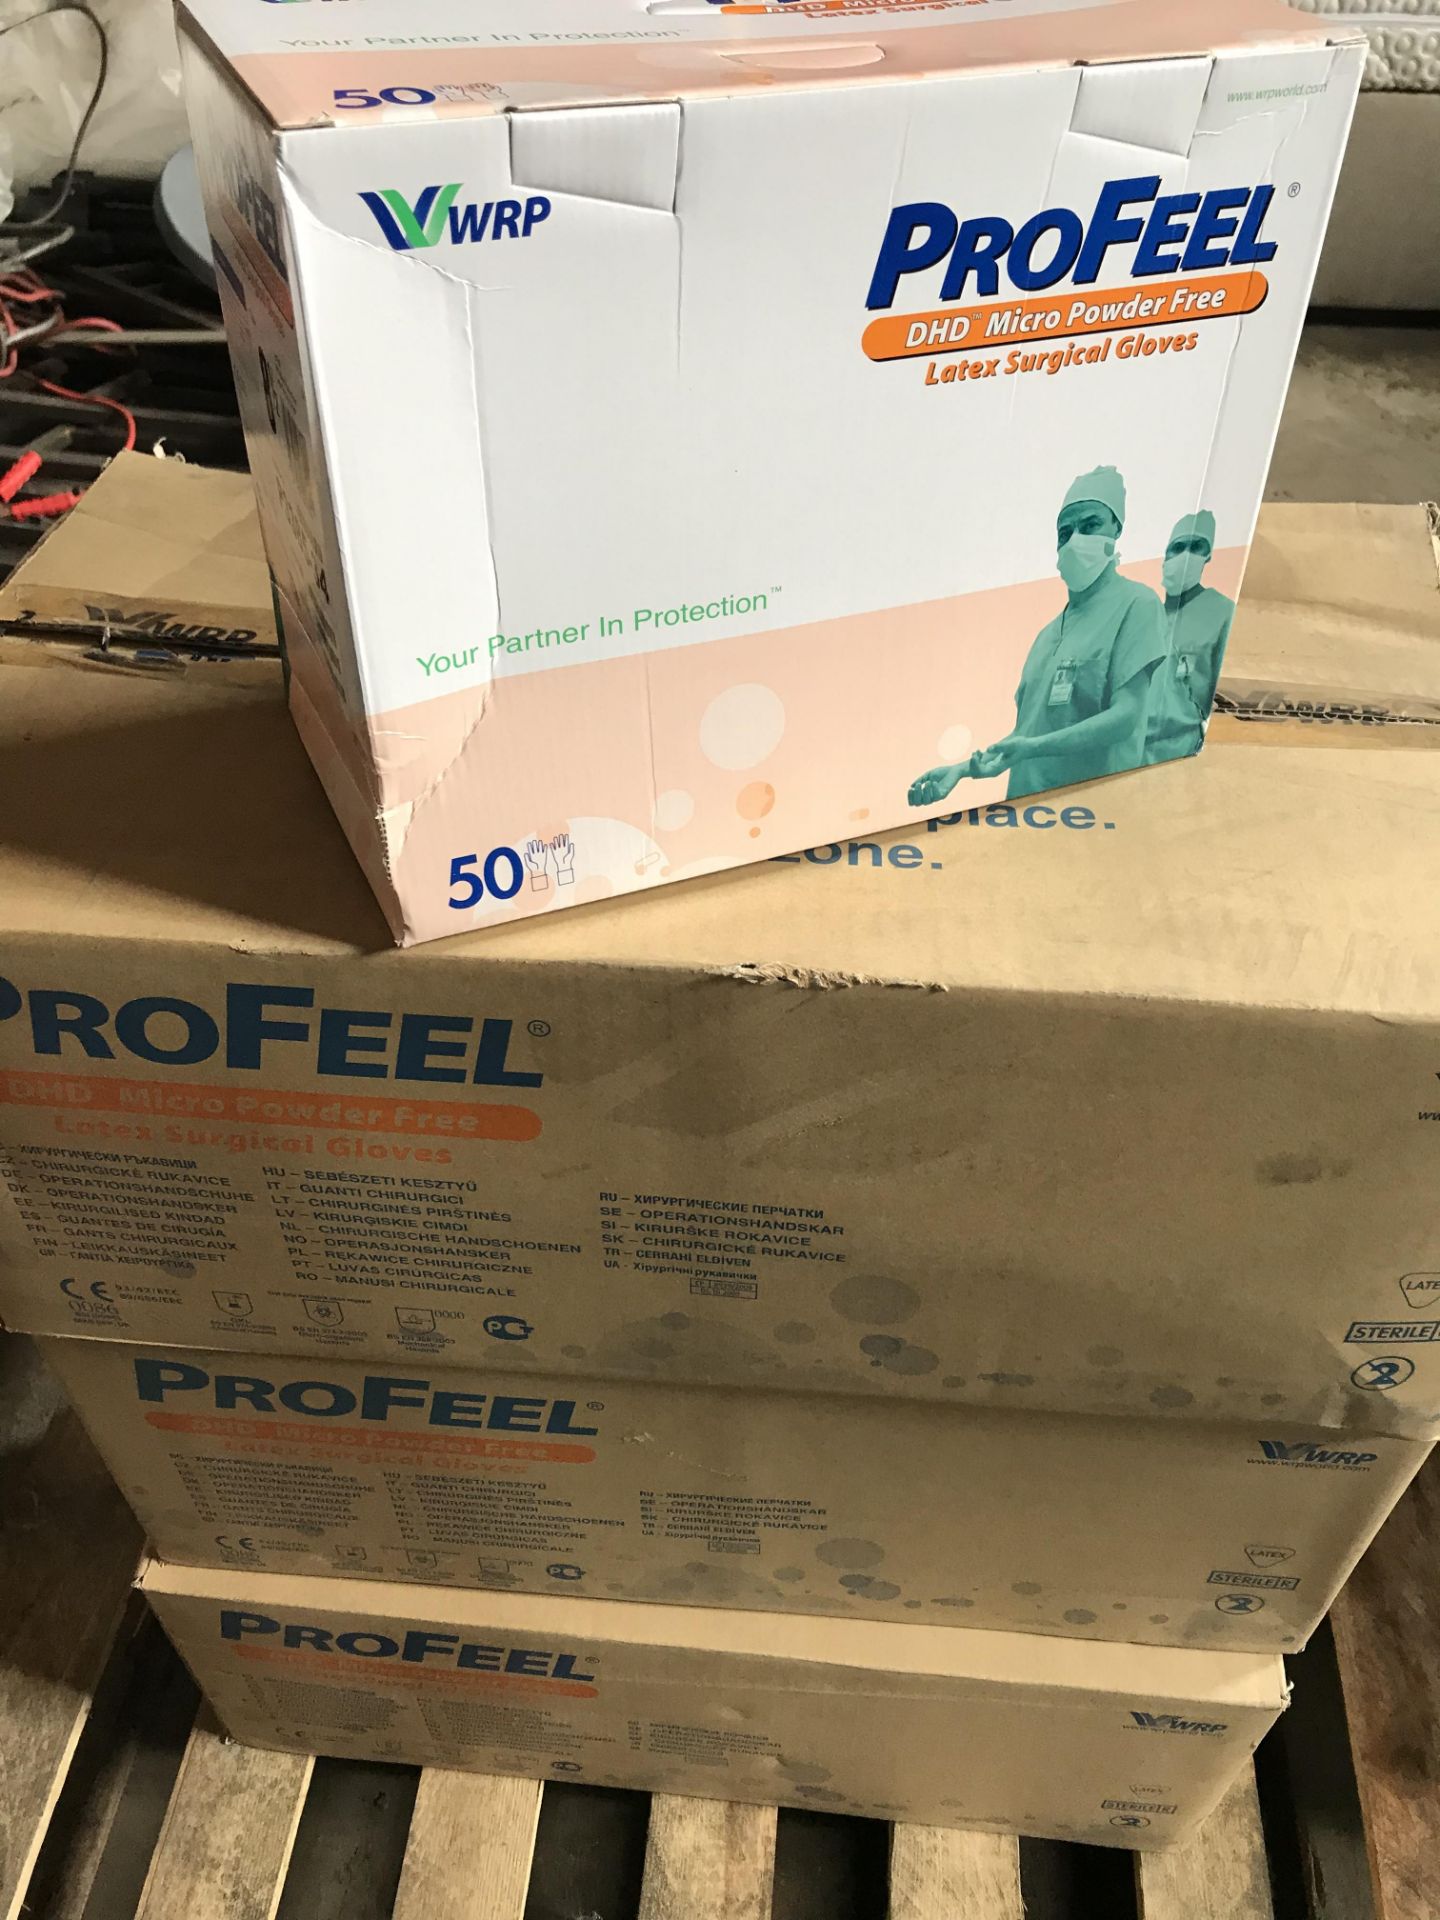 2,400 PROFEEL DHD MICRO POWDER FREE GLOVES - Image 2 of 4